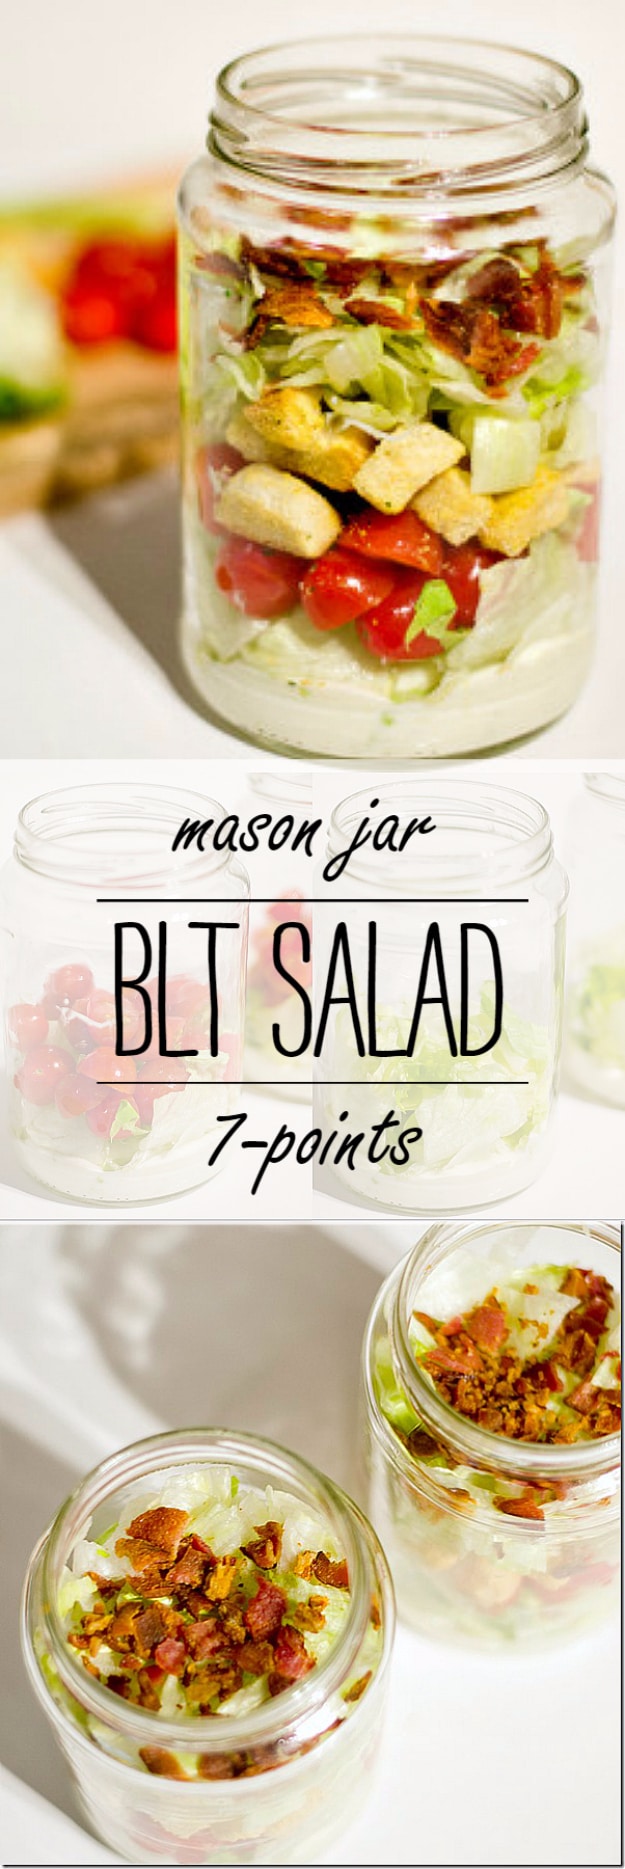 Best Recipes in A Jar - BLT Salad In A Jar - DIY Mason Jar Gifts, Cookie Recipes and Desserts, Canning Ideas, Overnight Oatmeal, How To Make Mason Jar Salad, Healthy Recipes and Printable Labels 